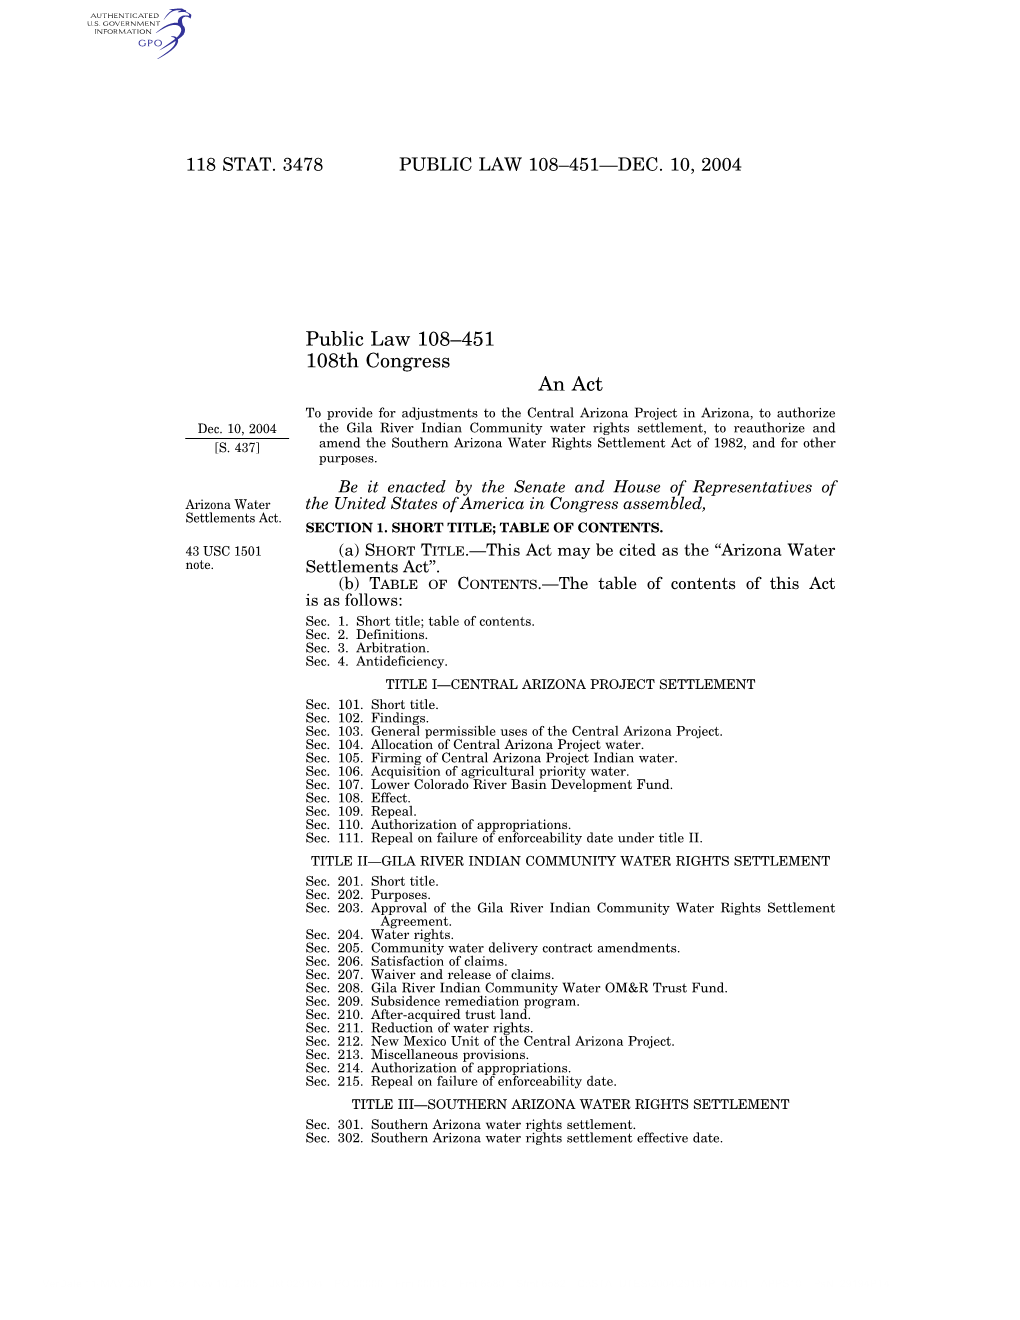 Public Law 108–451 108Th Congress an Act to Provide for Adjustments to the Central Arizona Project in Arizona, to Authorize Dec